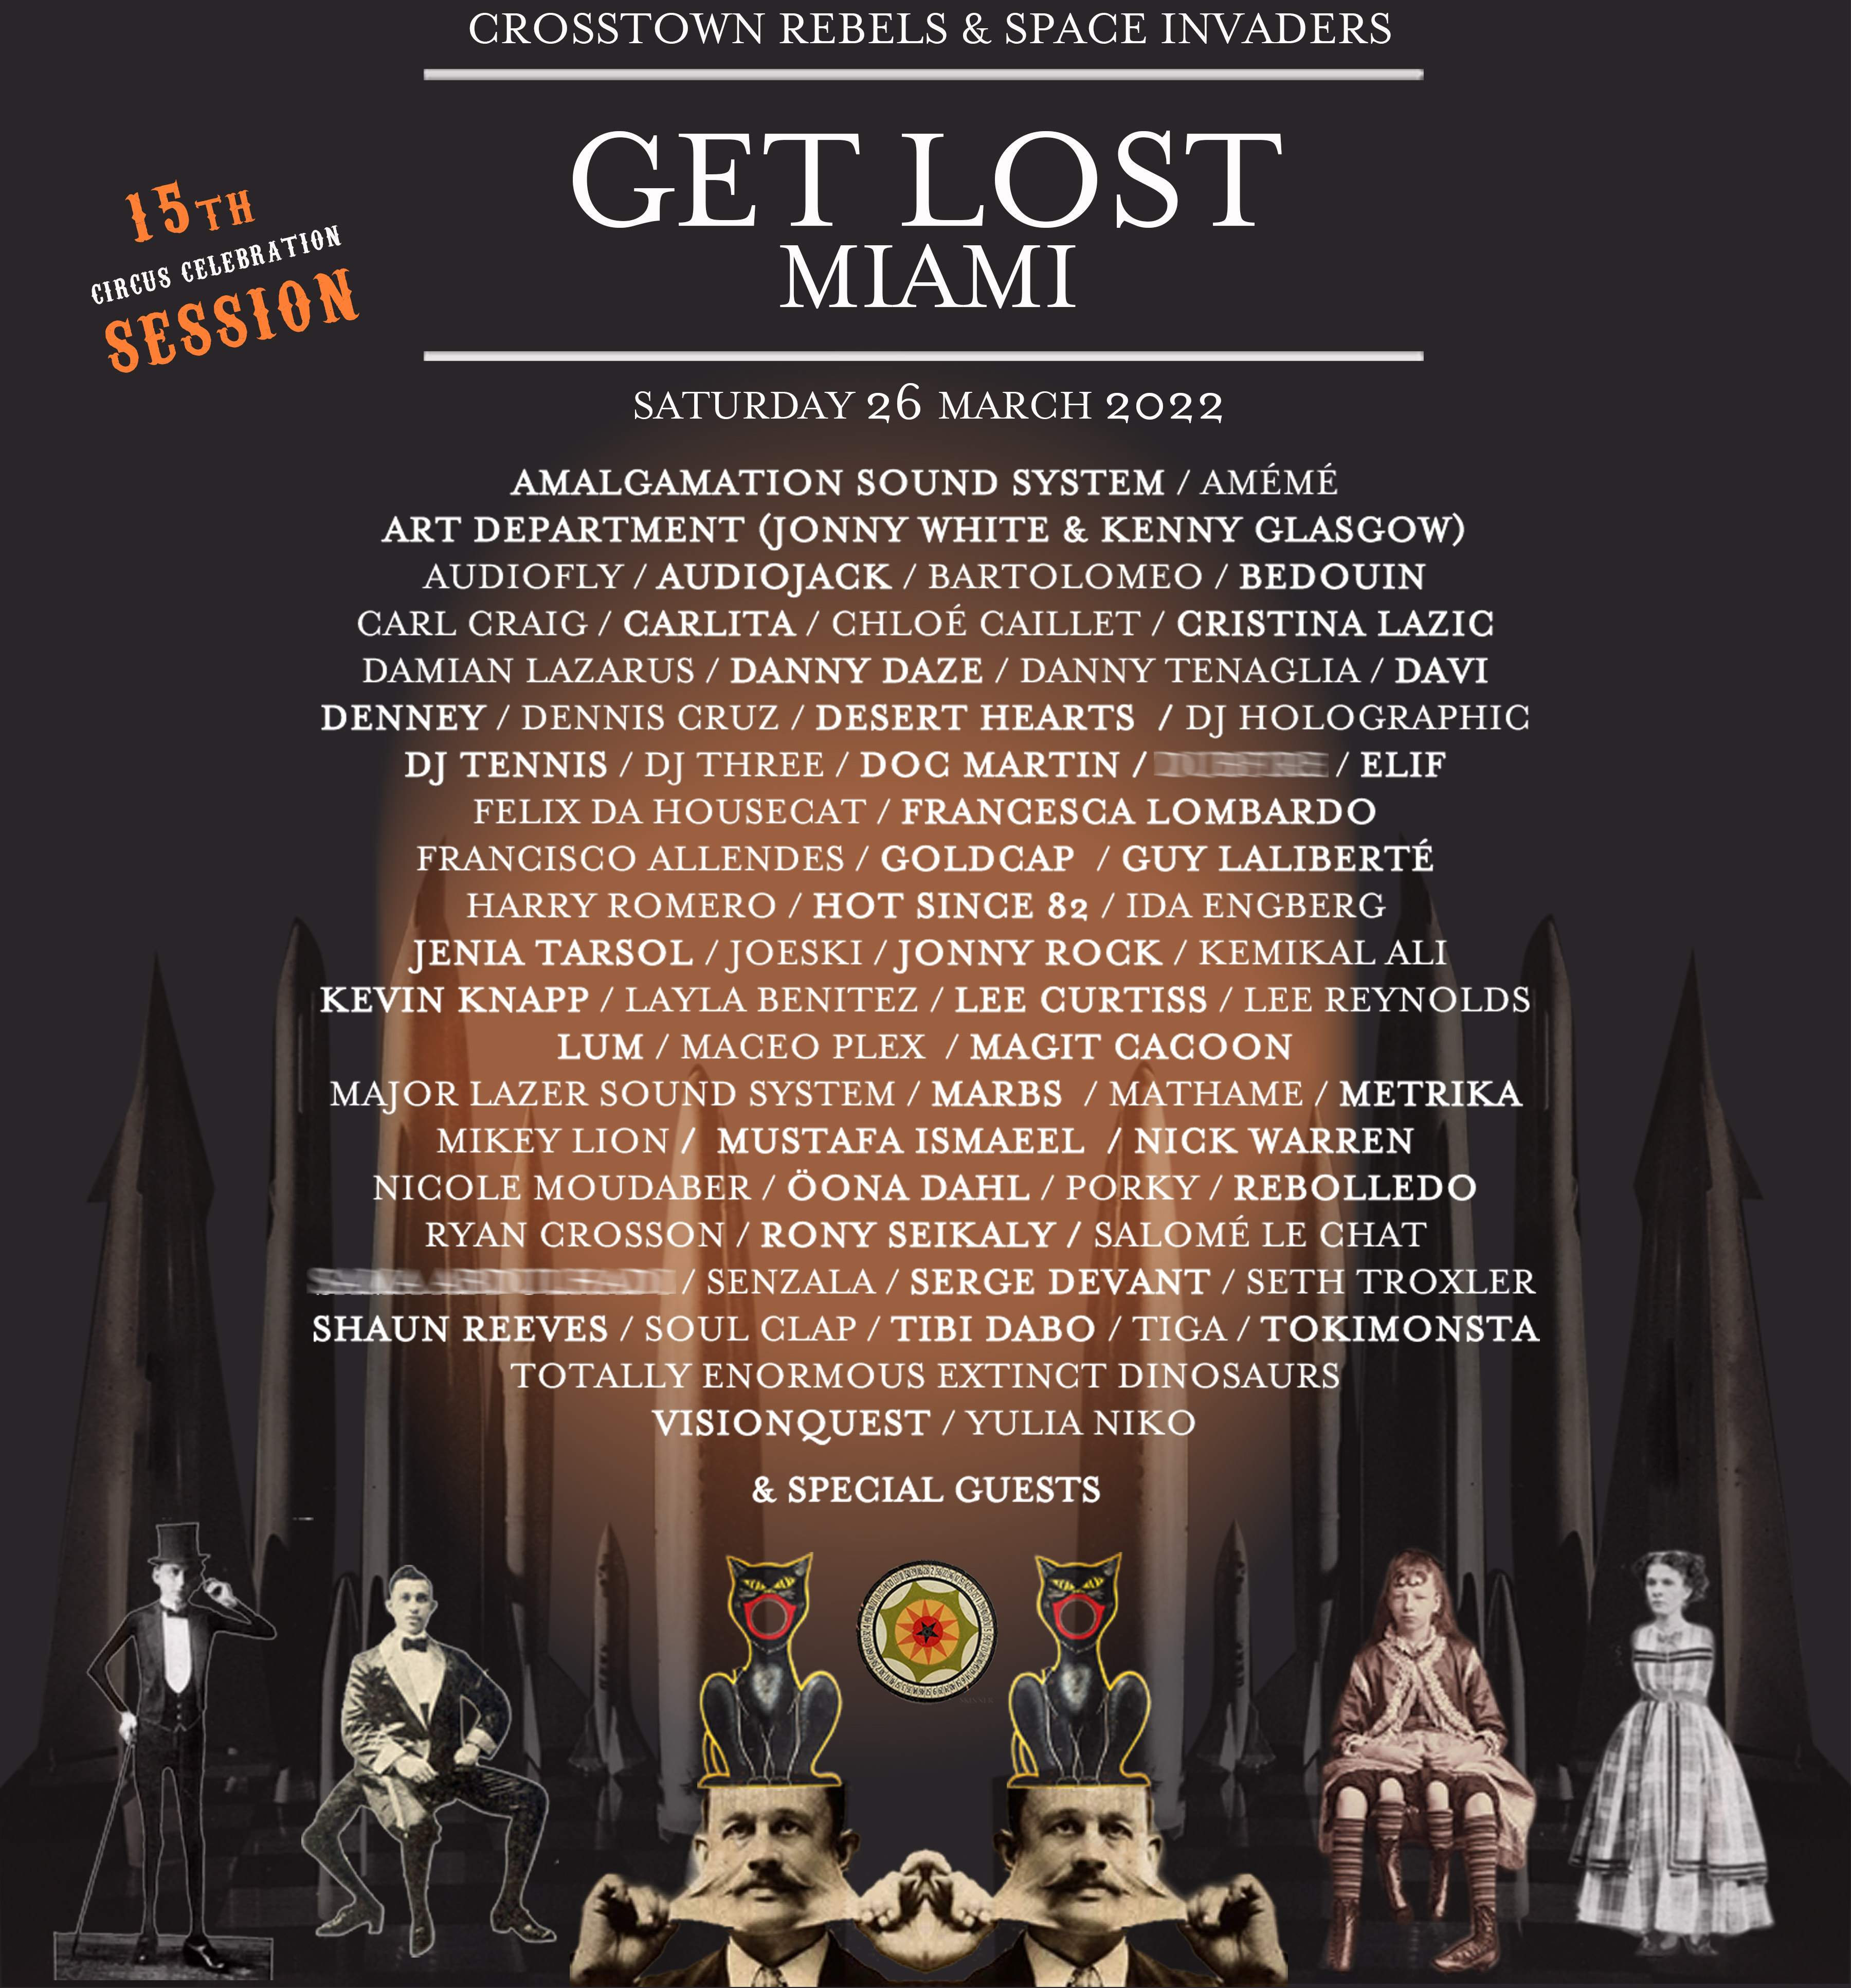 Get Lost 15th Session - Circus Celebration - フライヤー表